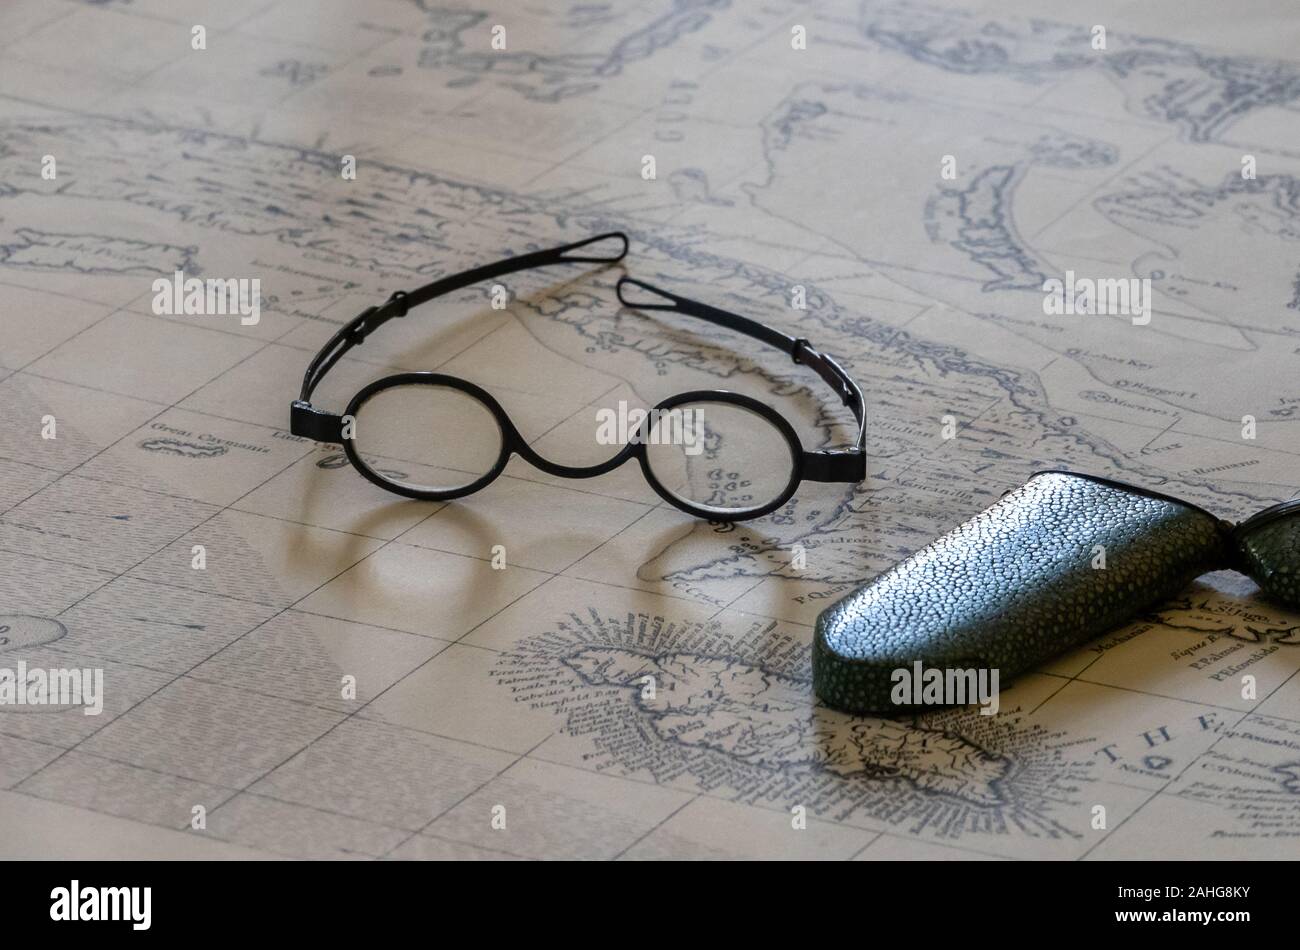 Pair of round magnifying spectacles on top of old sea faring map Stock Photo